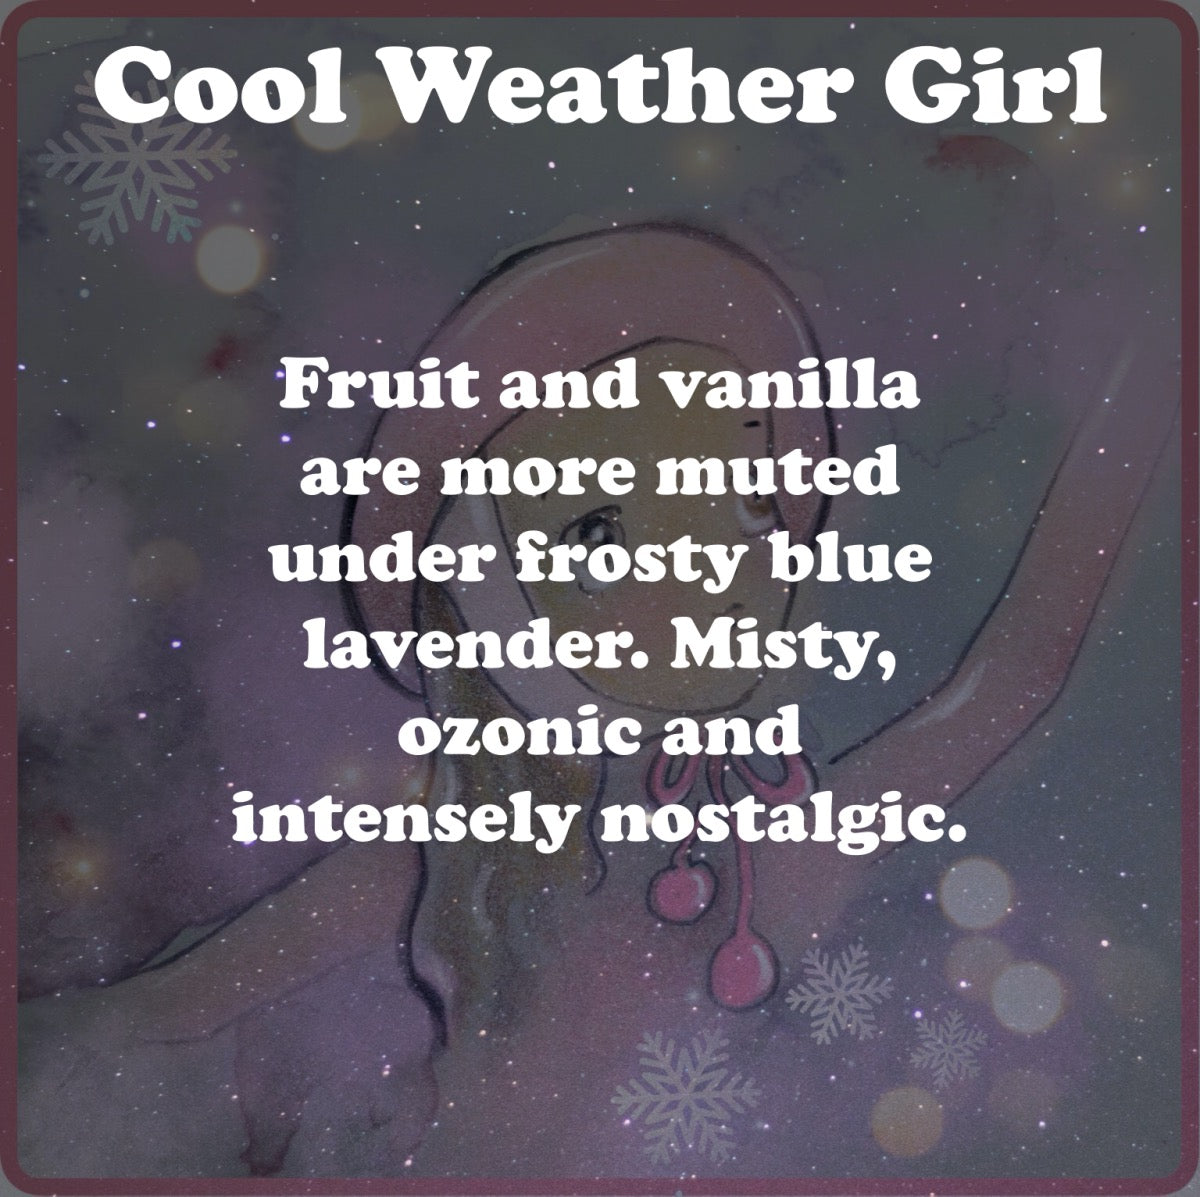 Cool Weather Girl - Stereoplasm